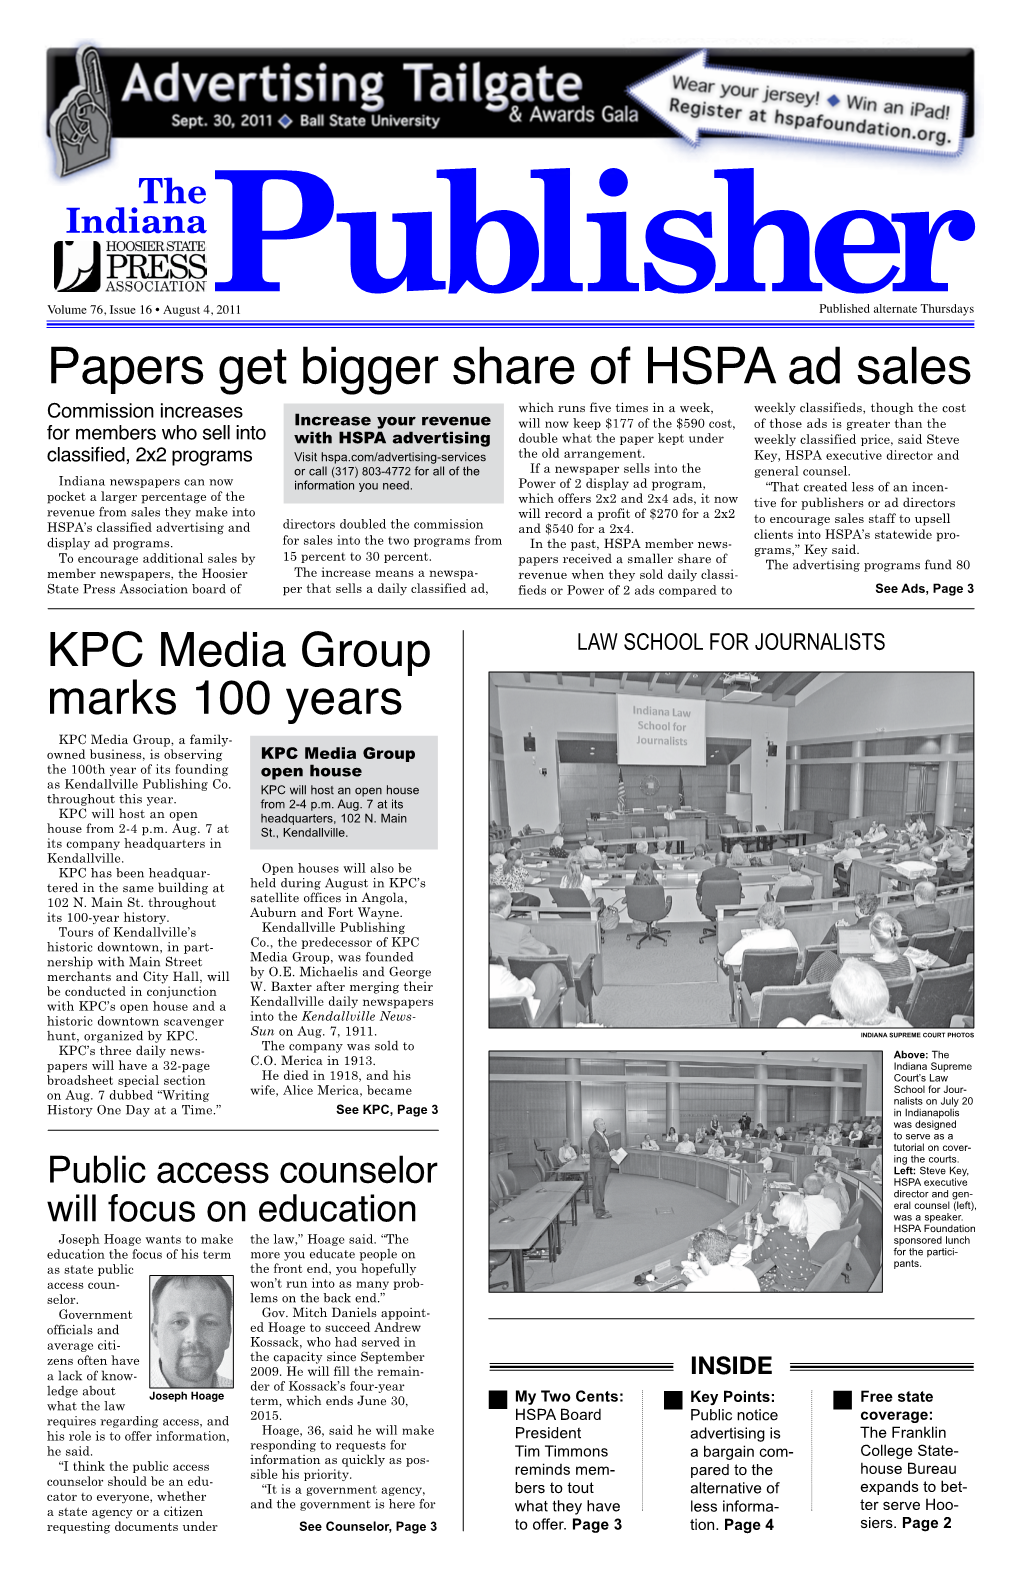 Papers Get Bigger Share of HSPA Ad Sales